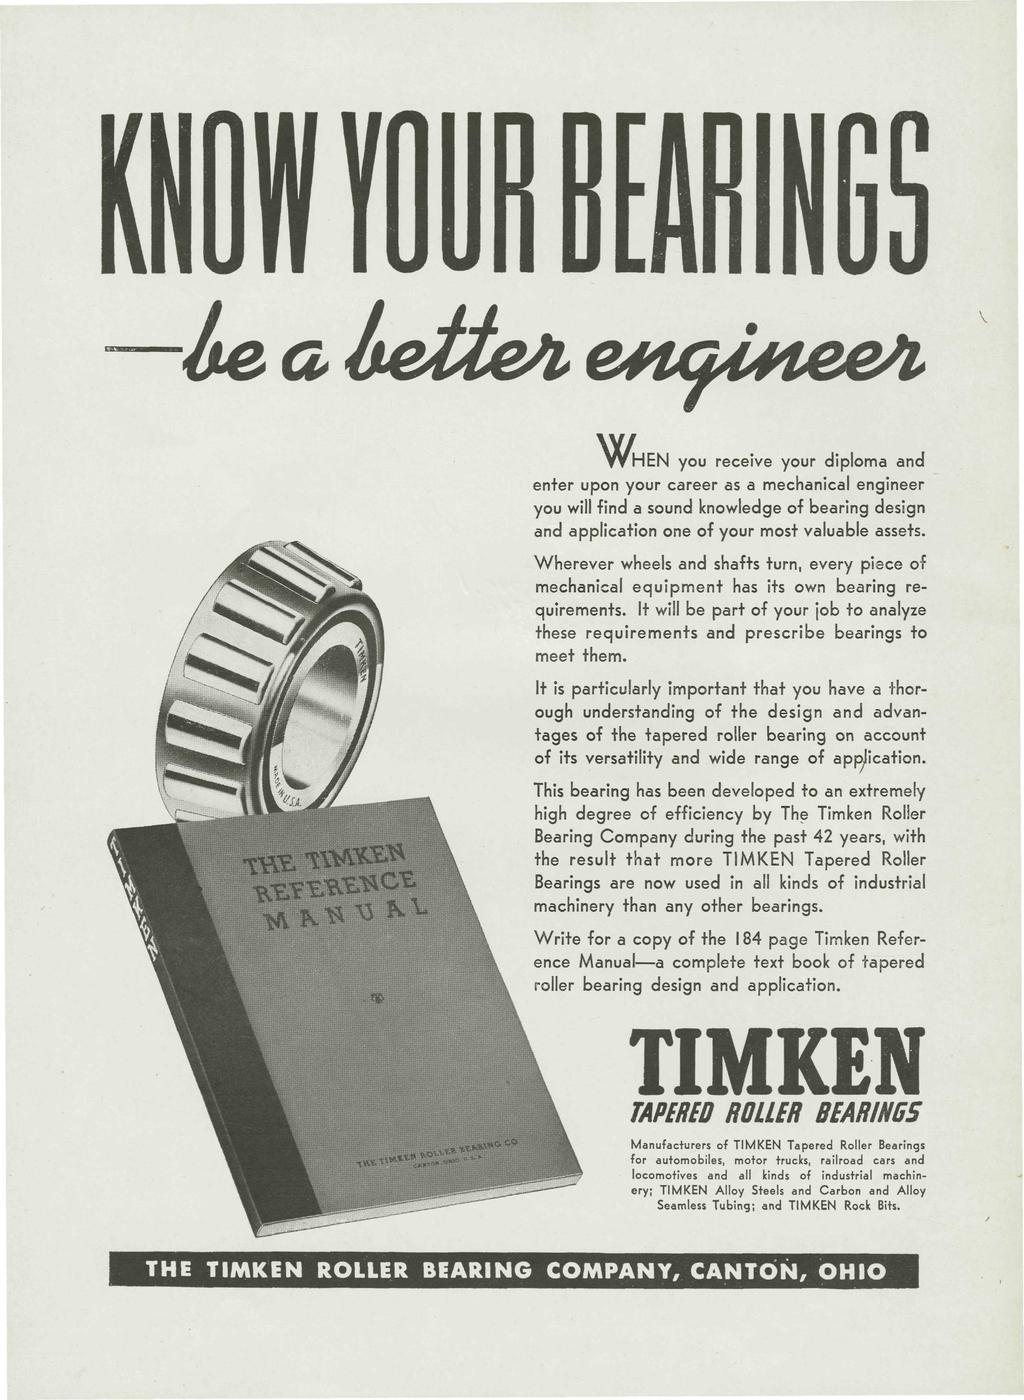 KNOW YOUR BEARlNGS be a better engineer WHEN you receive your diploma and enter upon your career as a mechanical engineer you will find a sound knowledge of bearing design and application one of your